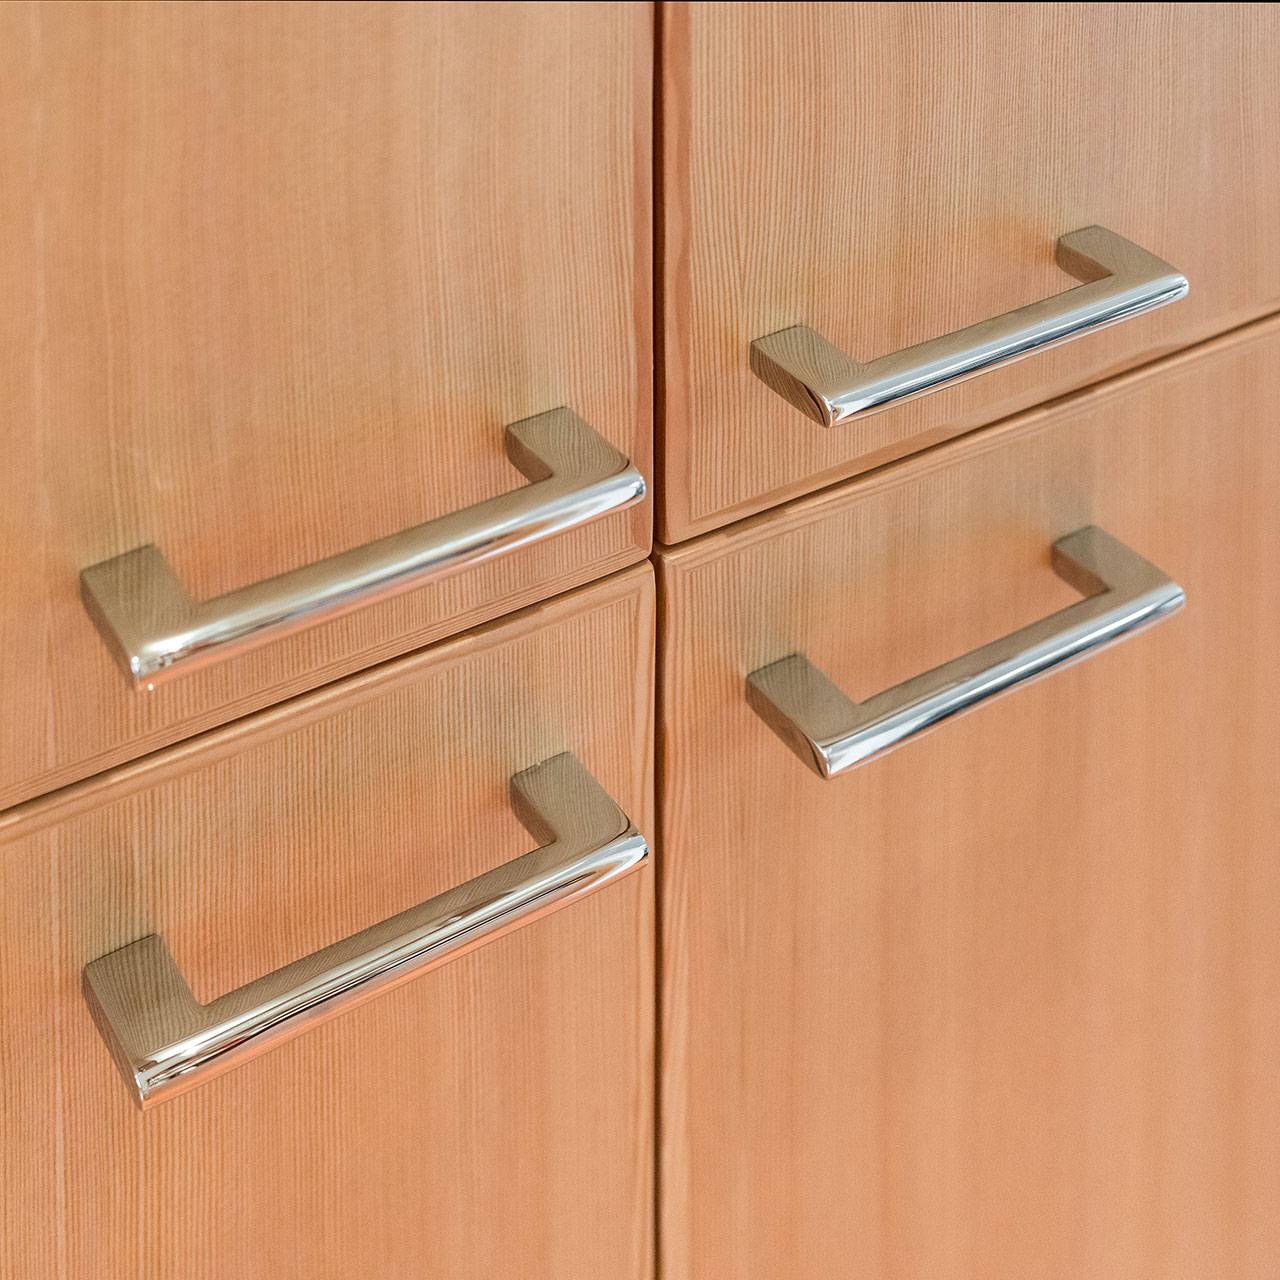 Shiny chrome cabinet pulls adorn the fir wood cabinetry at the Concordia Renovation.